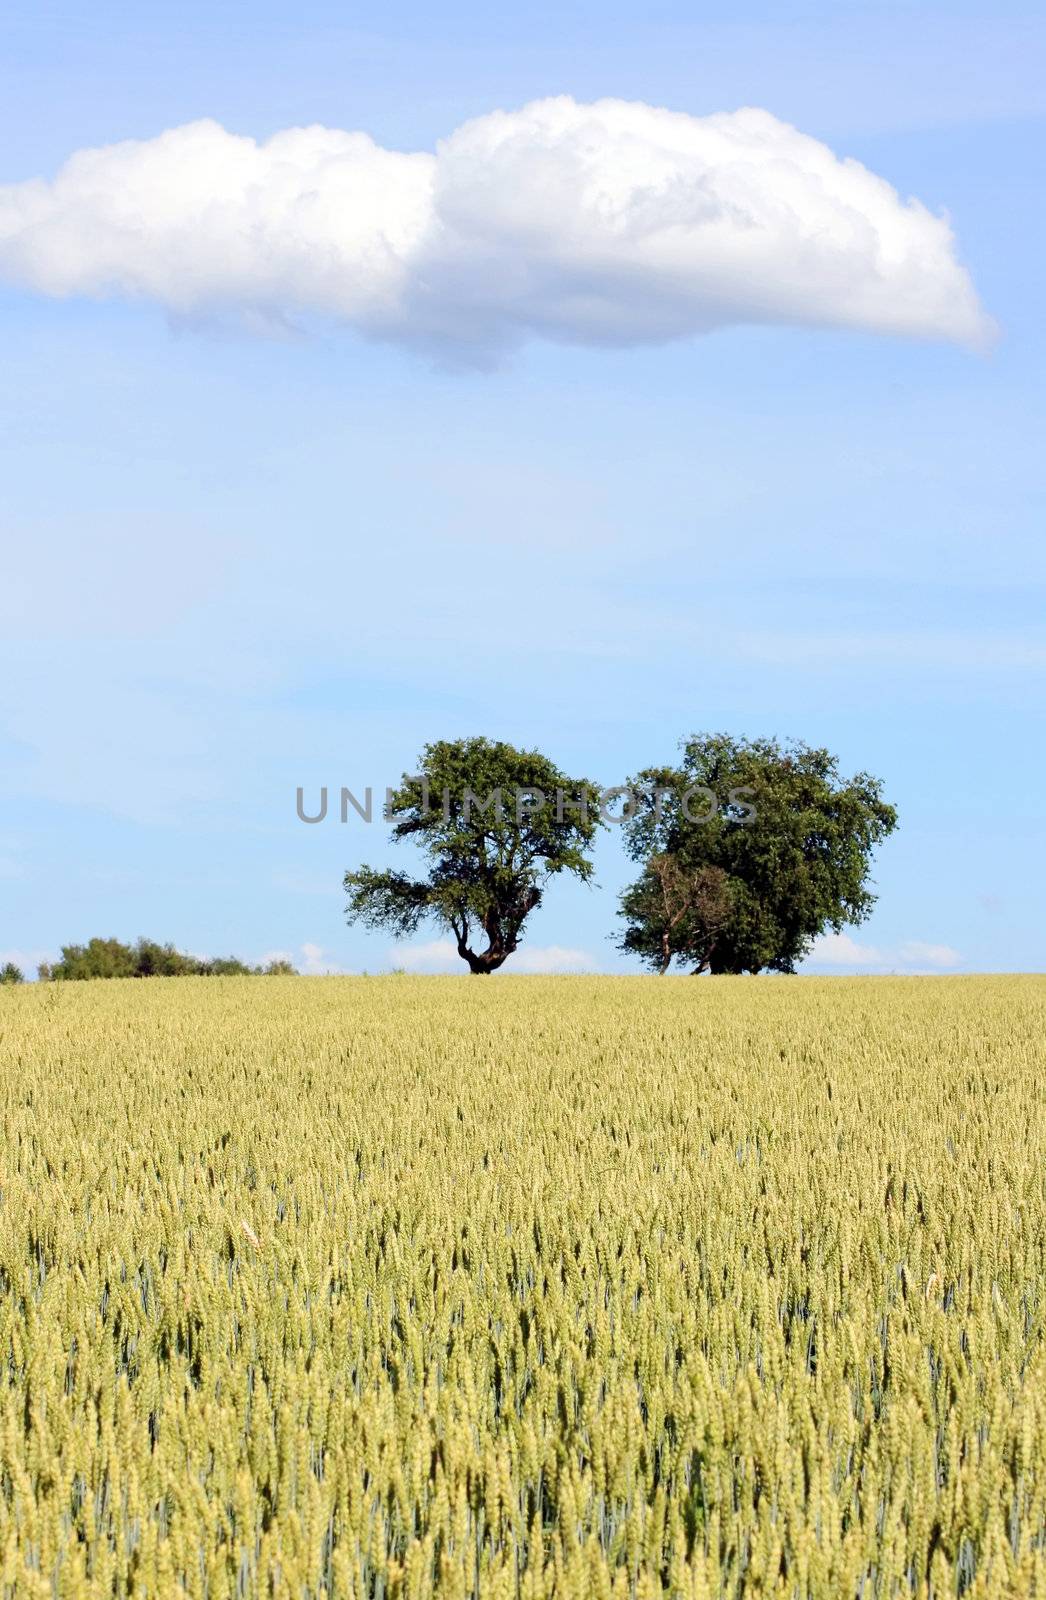 This image shows a cornfield with trees